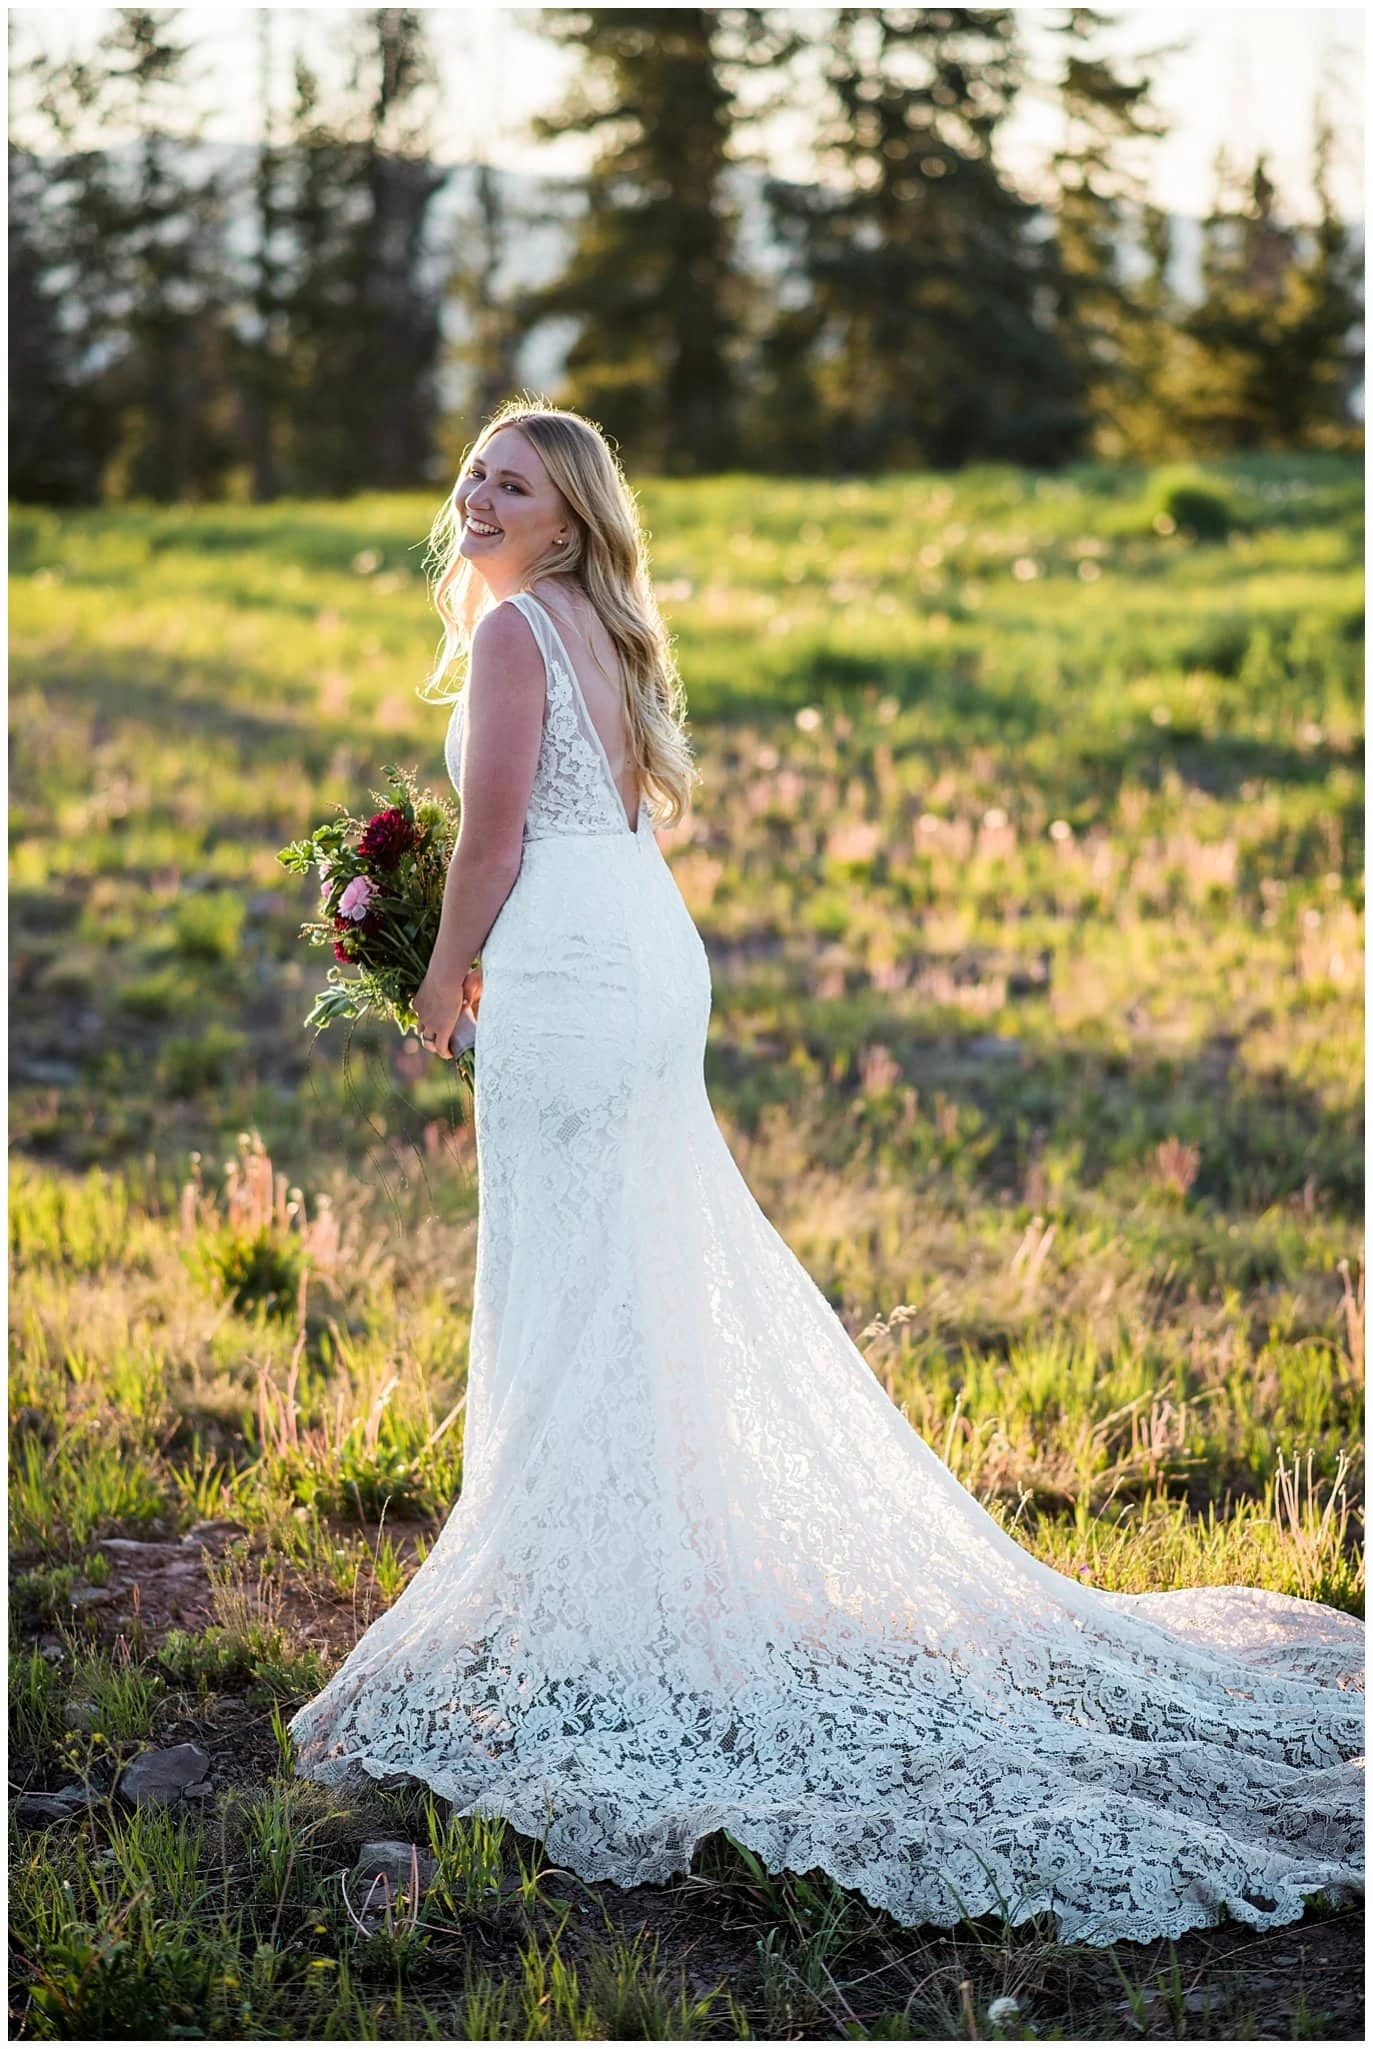 Made With Love Bridal lace wedding dress at sunset